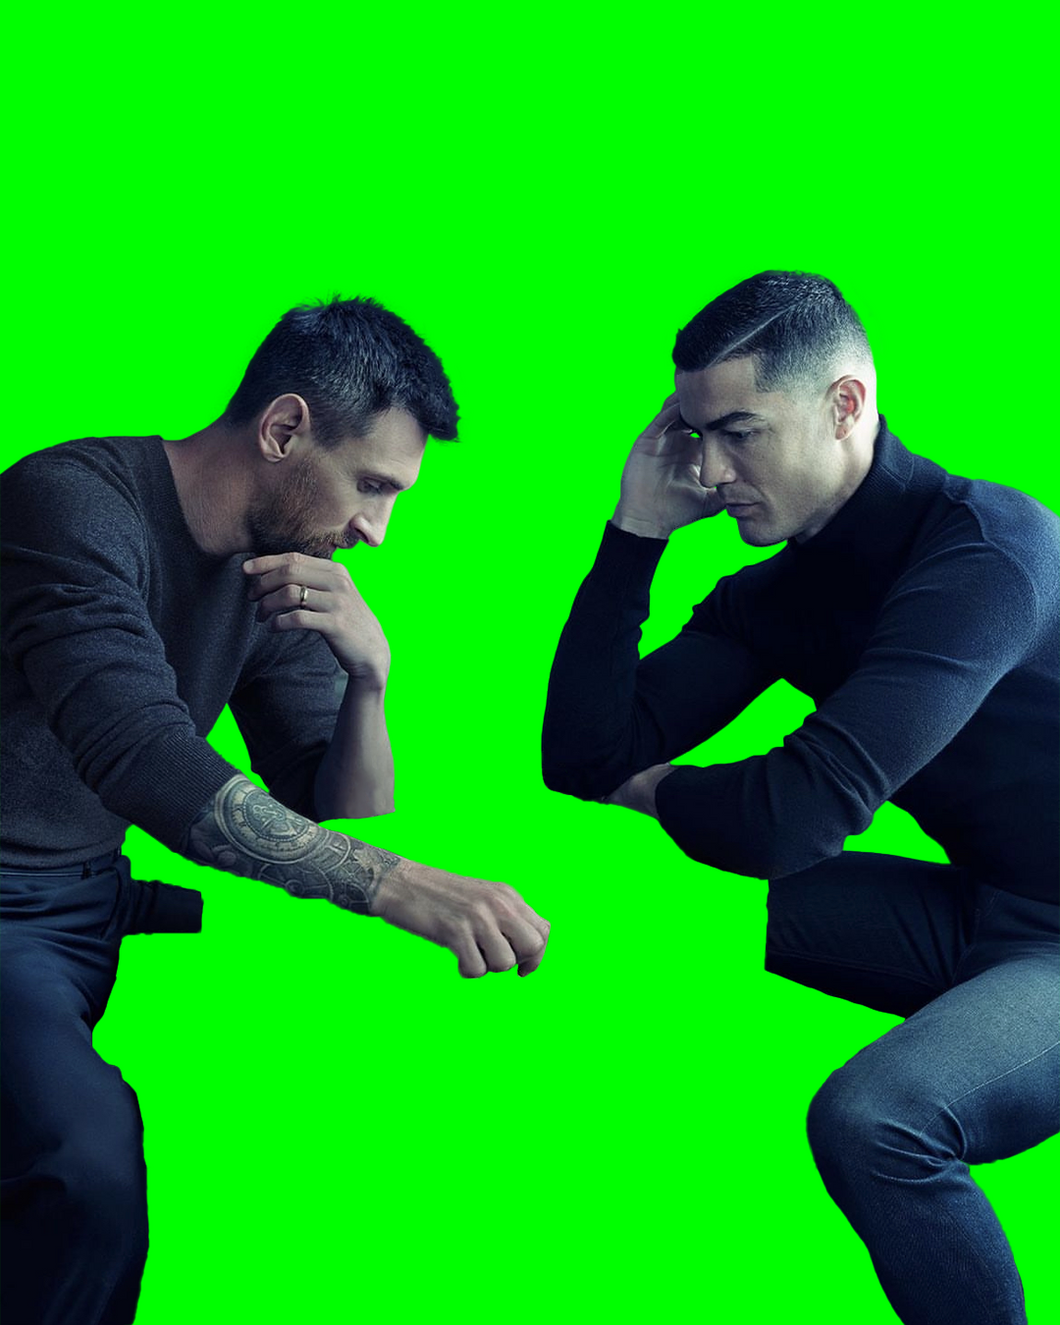 Messi and Ronaldo playing chess Meme Template (Green Screen) (Transparent PNG)